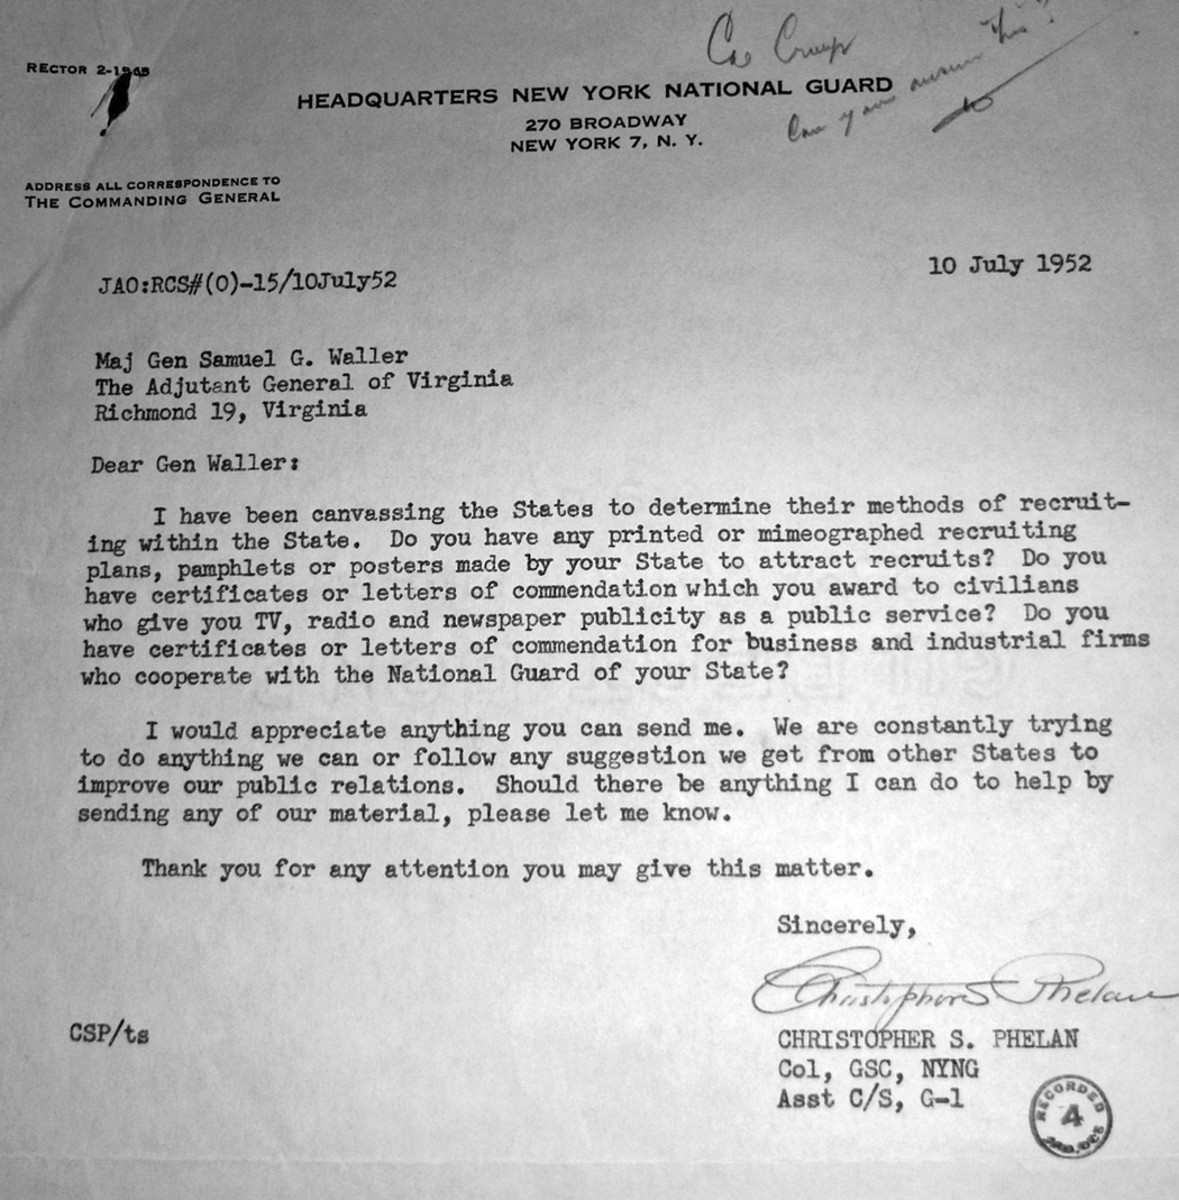 Proof that recruiting for the National Guard during the early 1950s was a challenge everywhere; this letter from the archives was written to the Adjutant General of Virginia from the Headquarters of the New York National Guard looking to share recruiting techniques and materials. General Waller’s later response; we’ll share all we have with you but we are struggling also.